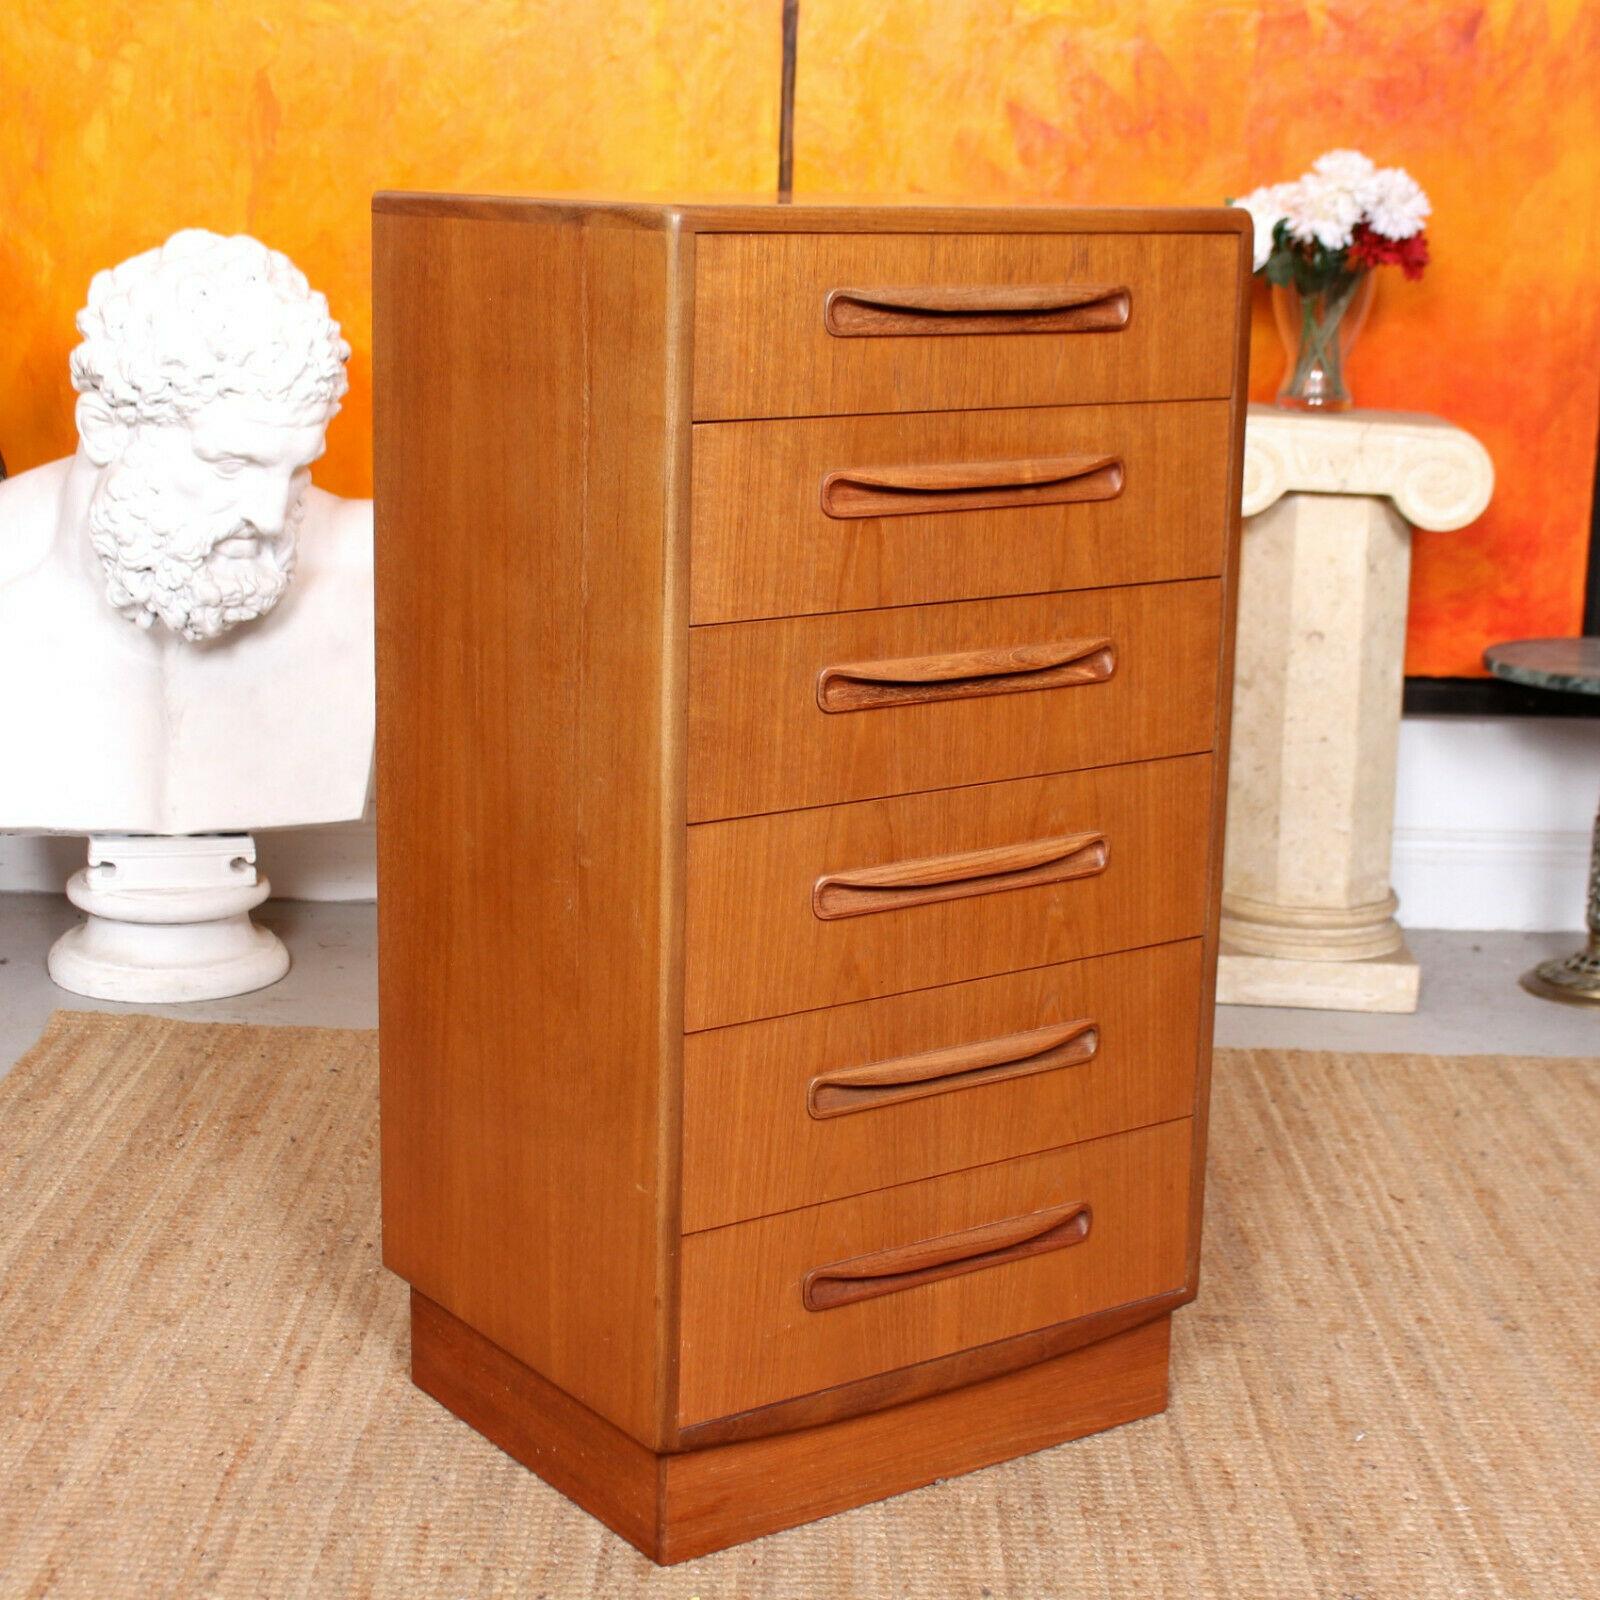 An impressive teak chest of drawers by G Plan from the companies iconic Freco range.

Offered in good condition, an aged mark to one side as per photographs.